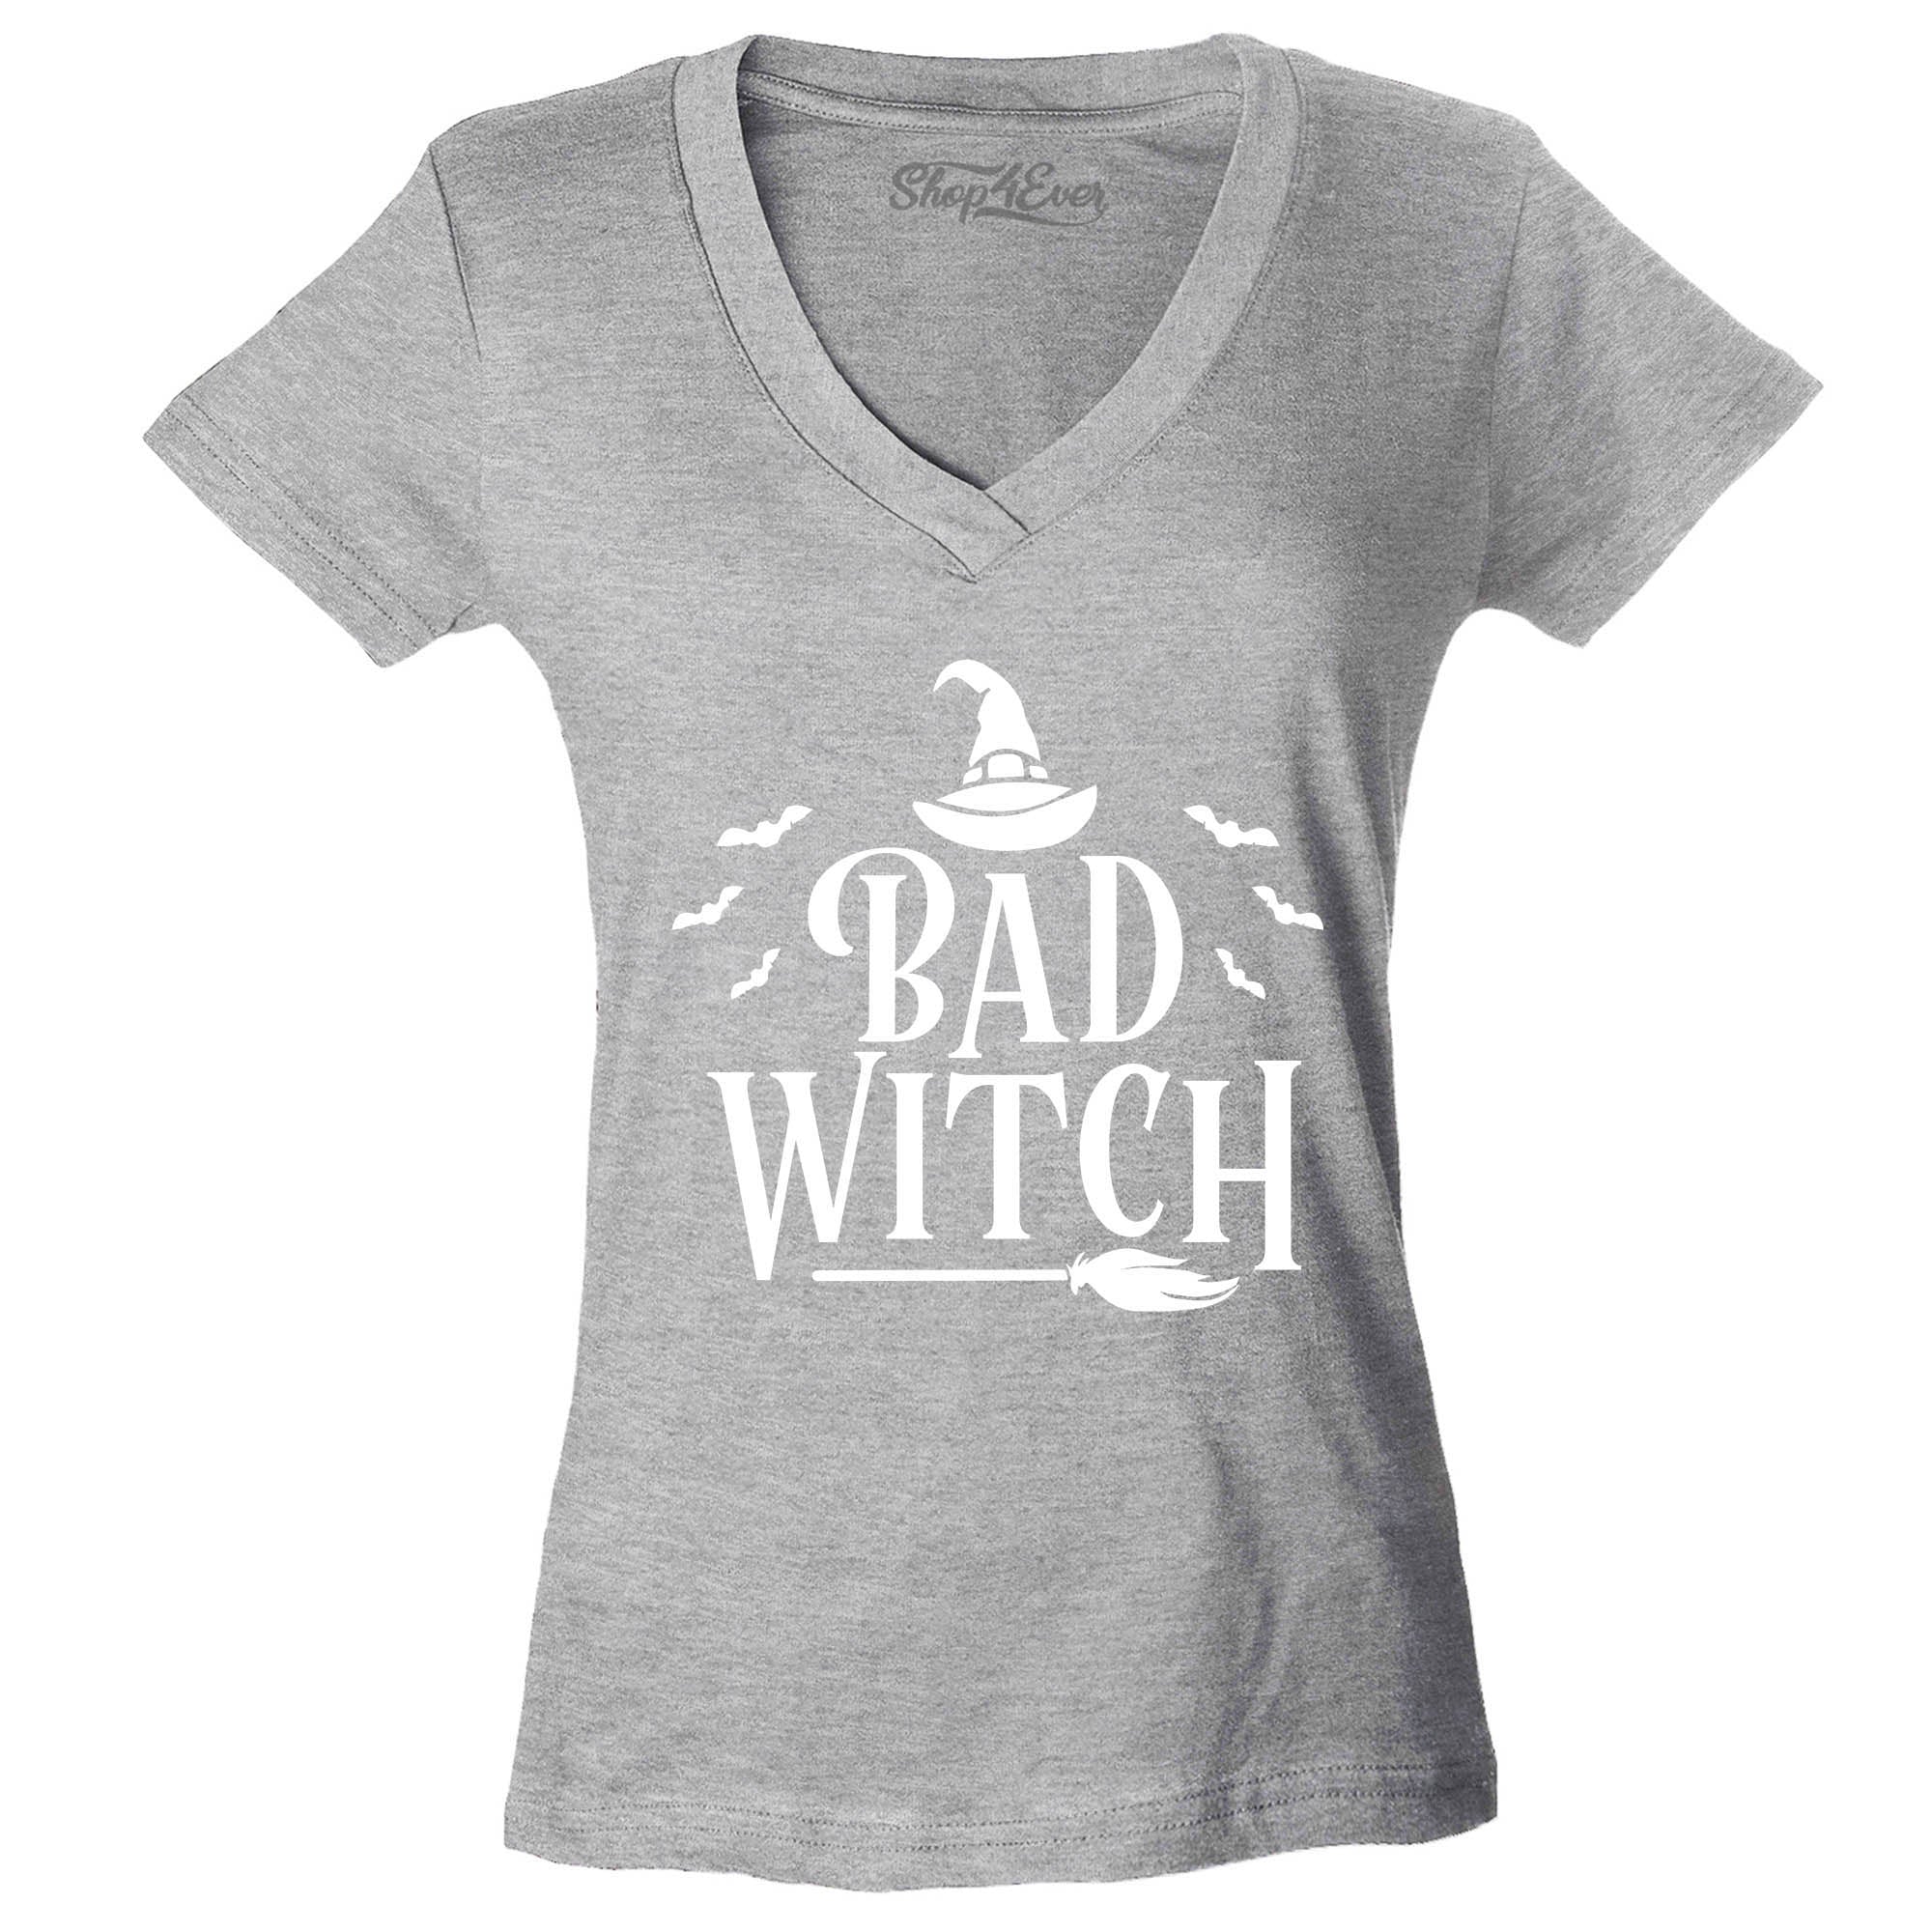 Good Witch ~ Bad Witch Matching Halloween Costume Women's V-Neck T-Shirt Slim Fit